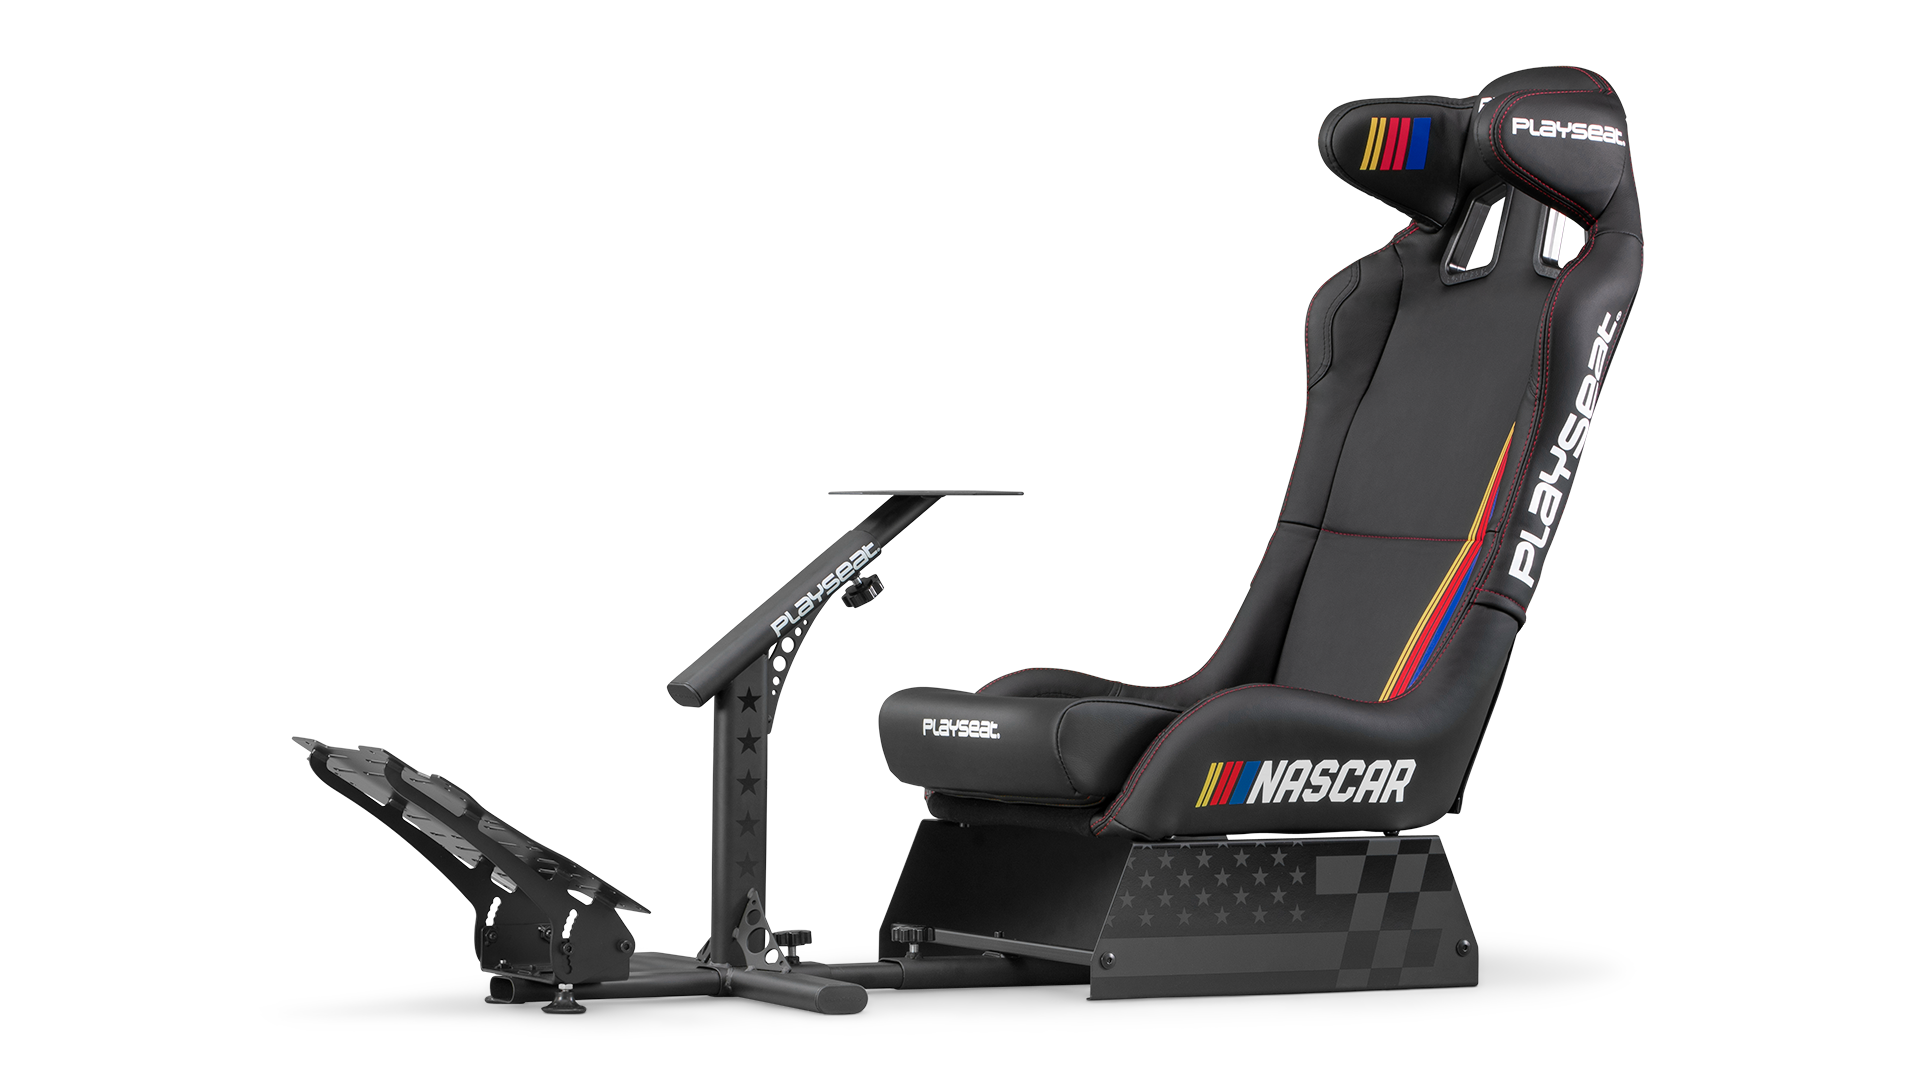 playseat-evolution-pro-nascar-racing-simulator-front-angle-view-1920x1080.png